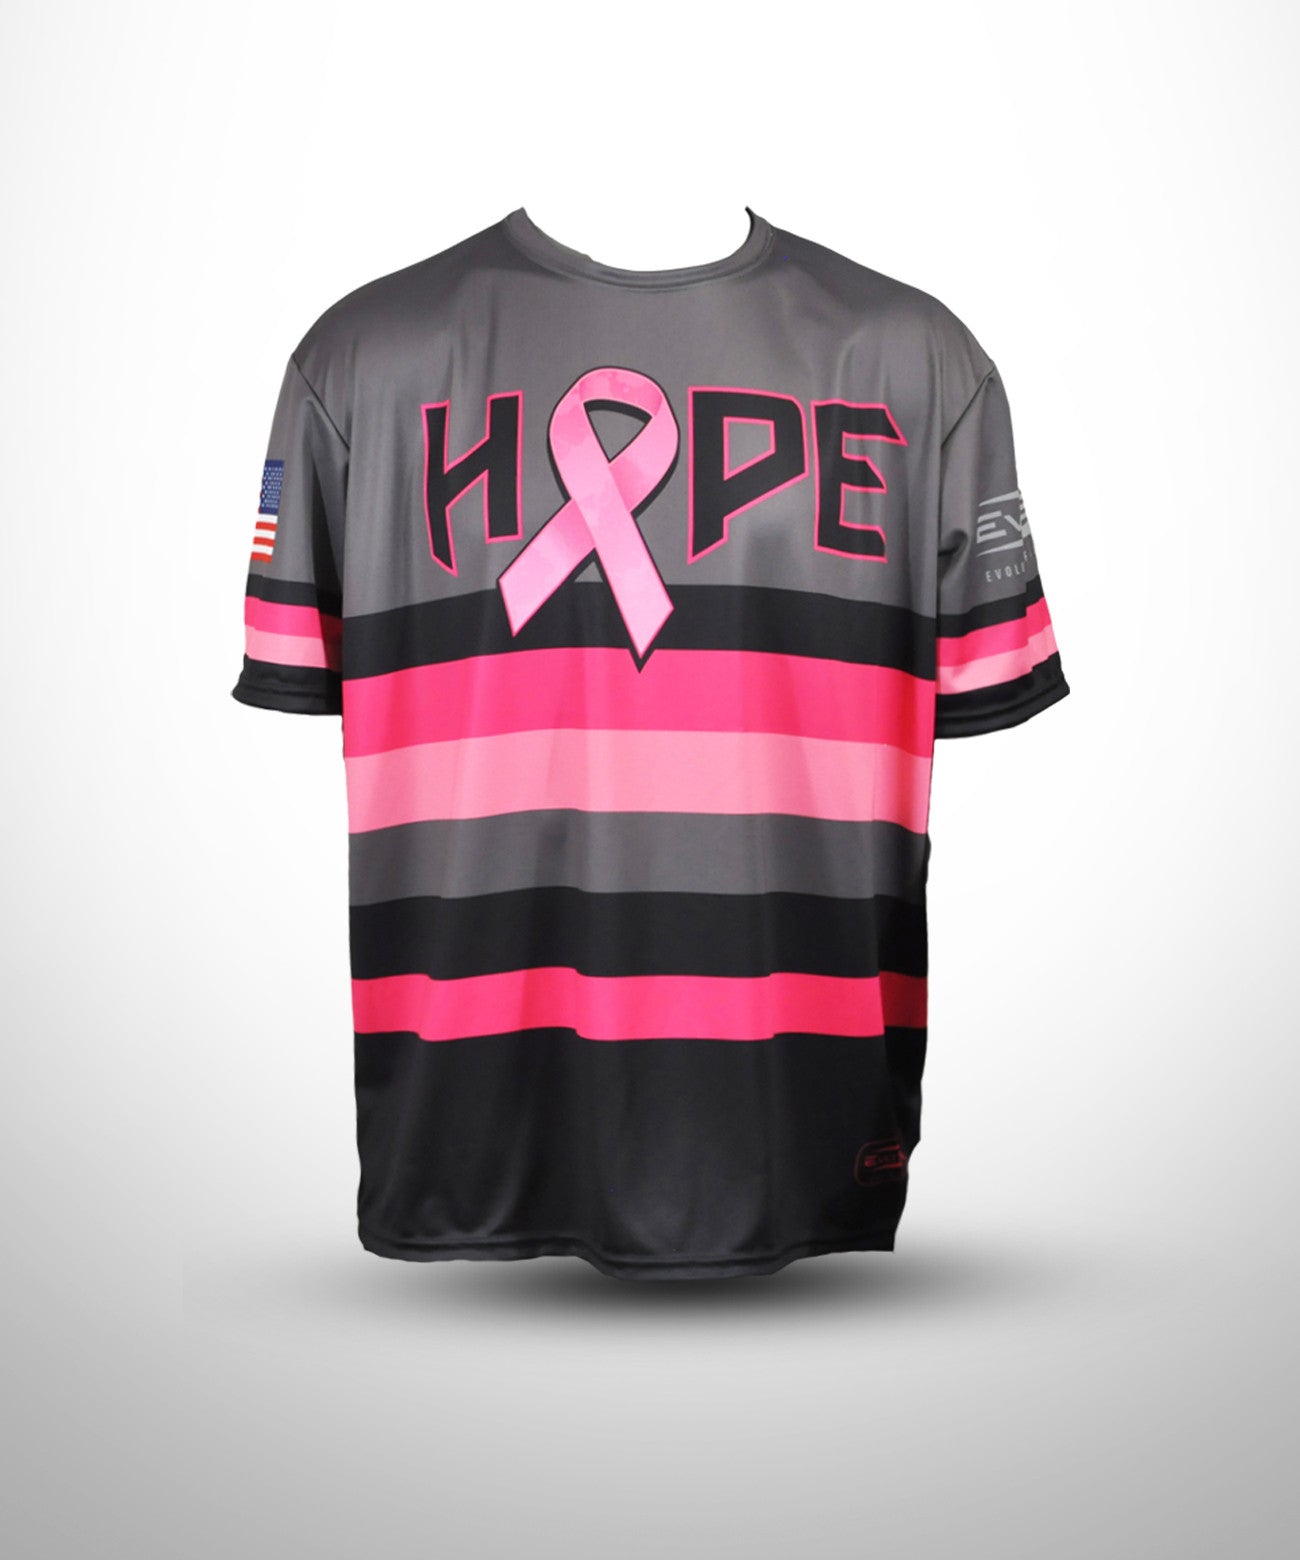 Last July we wore pink jerseys to raise awareness for breast cancer. Today,  we focus our attention on #PinkShirtDay, looking to combat…